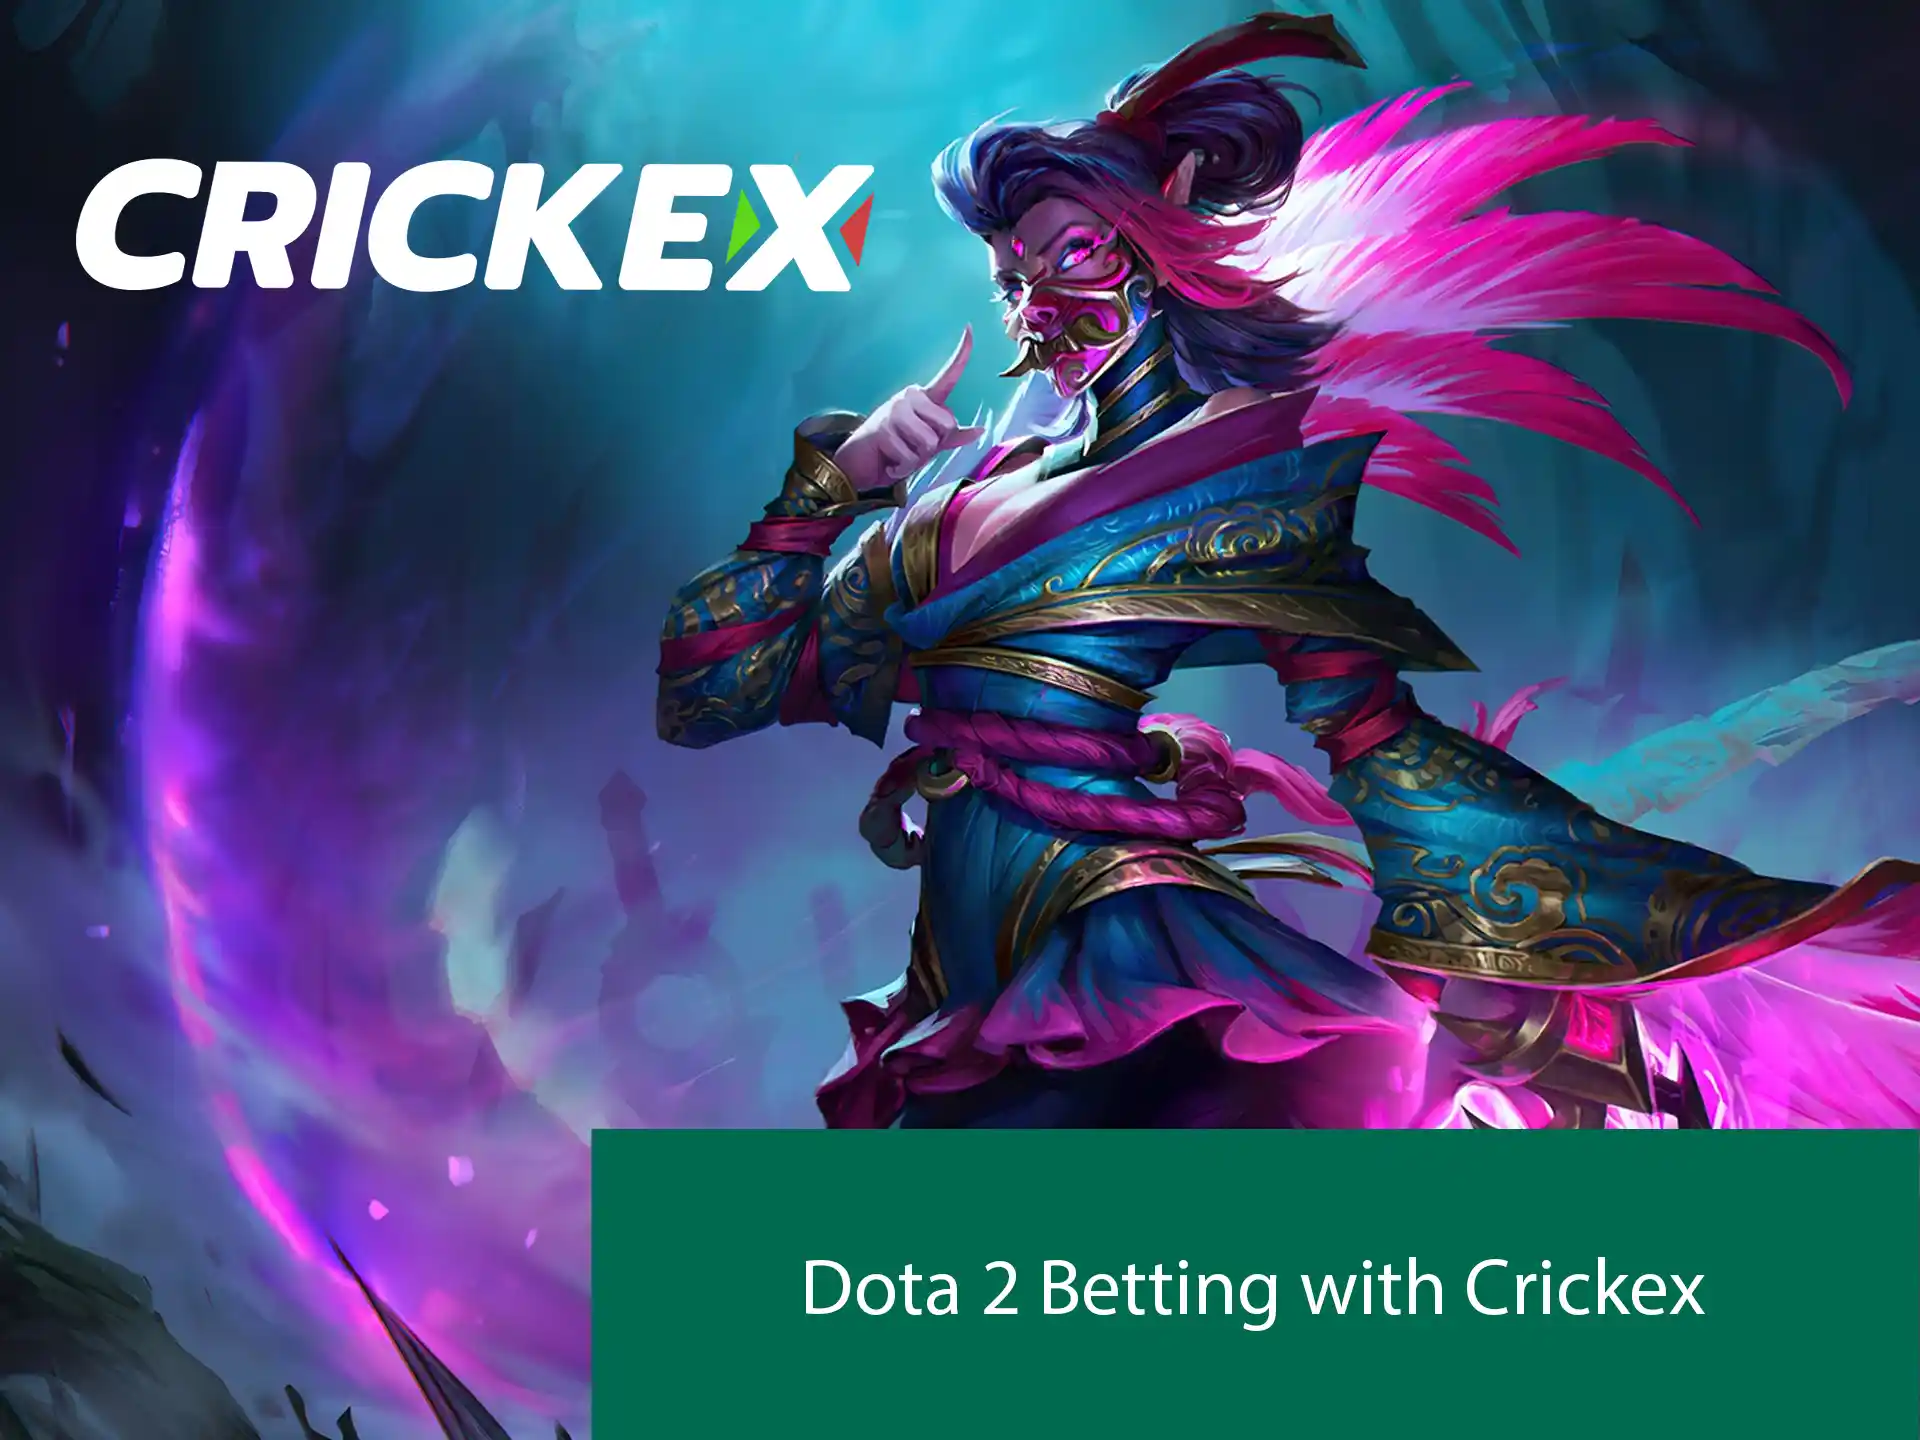 Crickex allows you to bet on Dota 2 and all the most popular events.